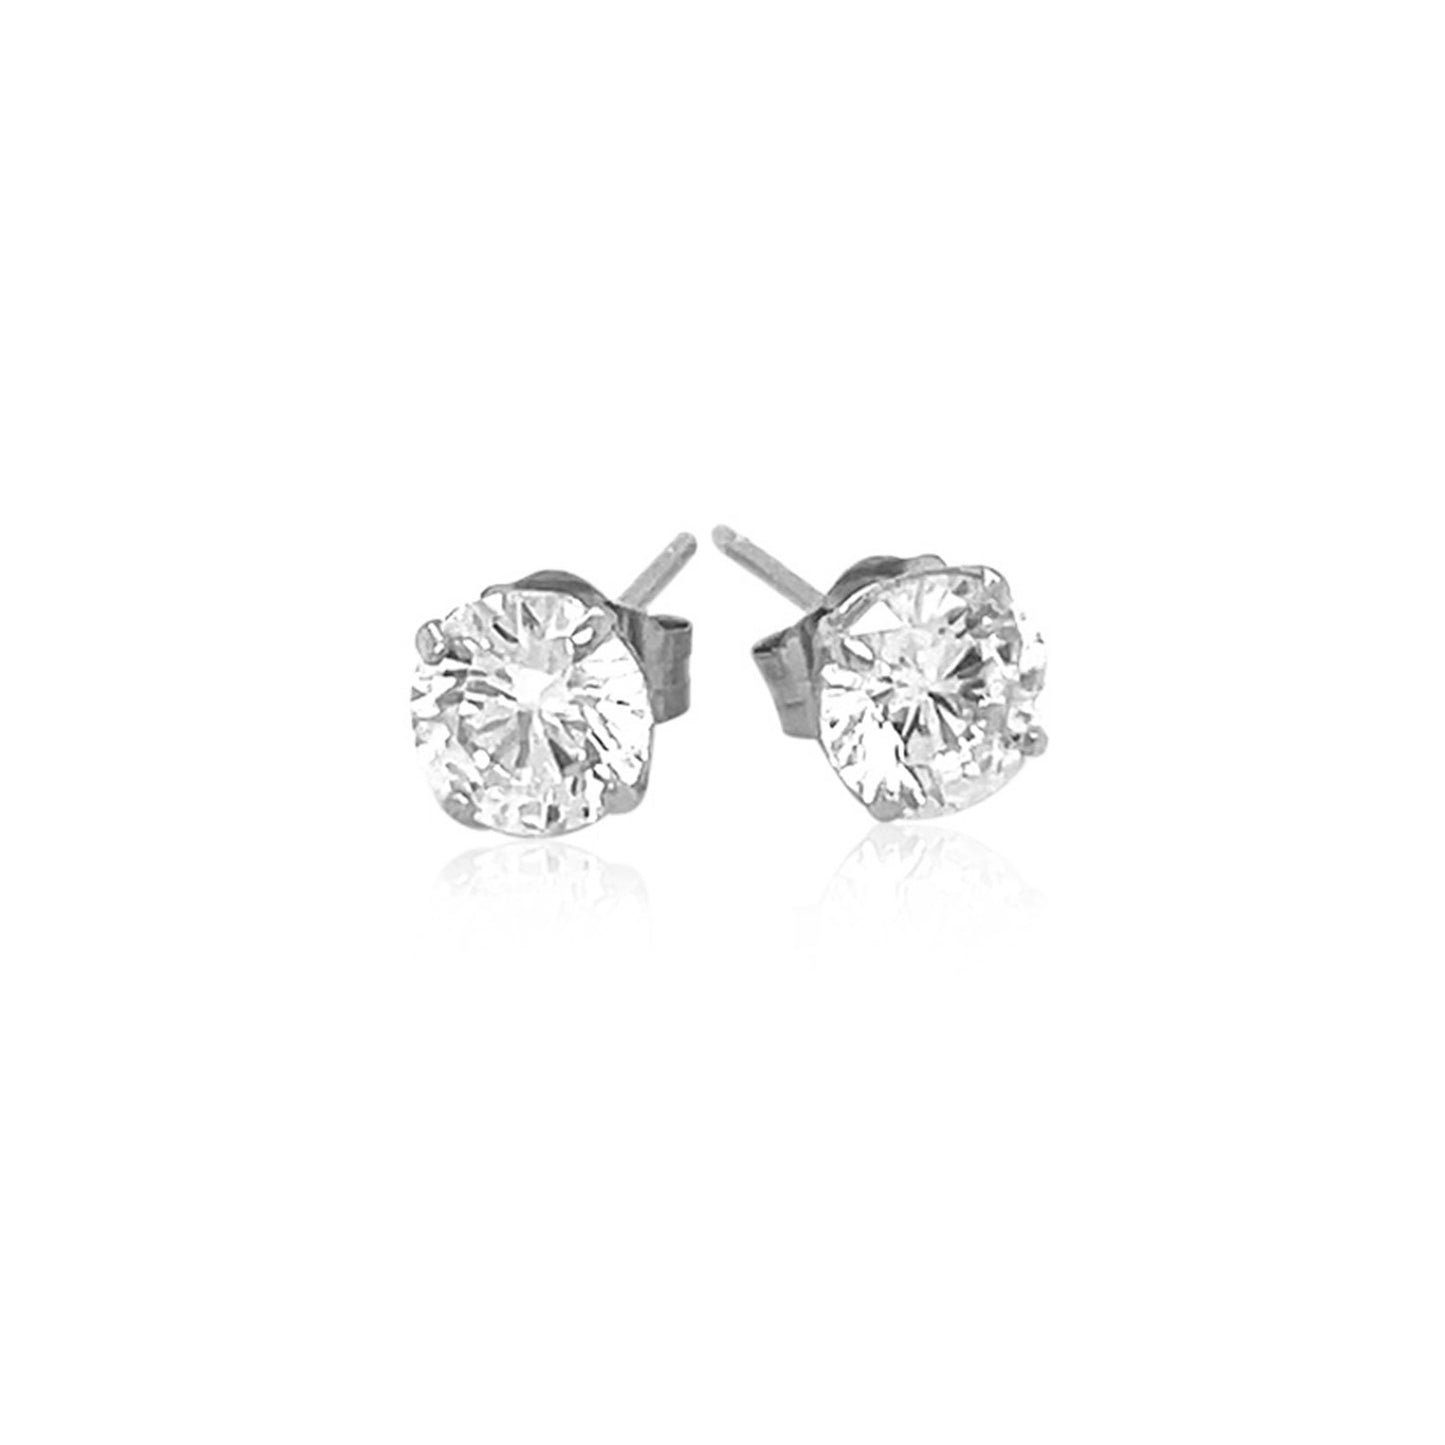 14k White Gold Stud Earrings with White Hue Faceted Cubic Zirconia(5mm)